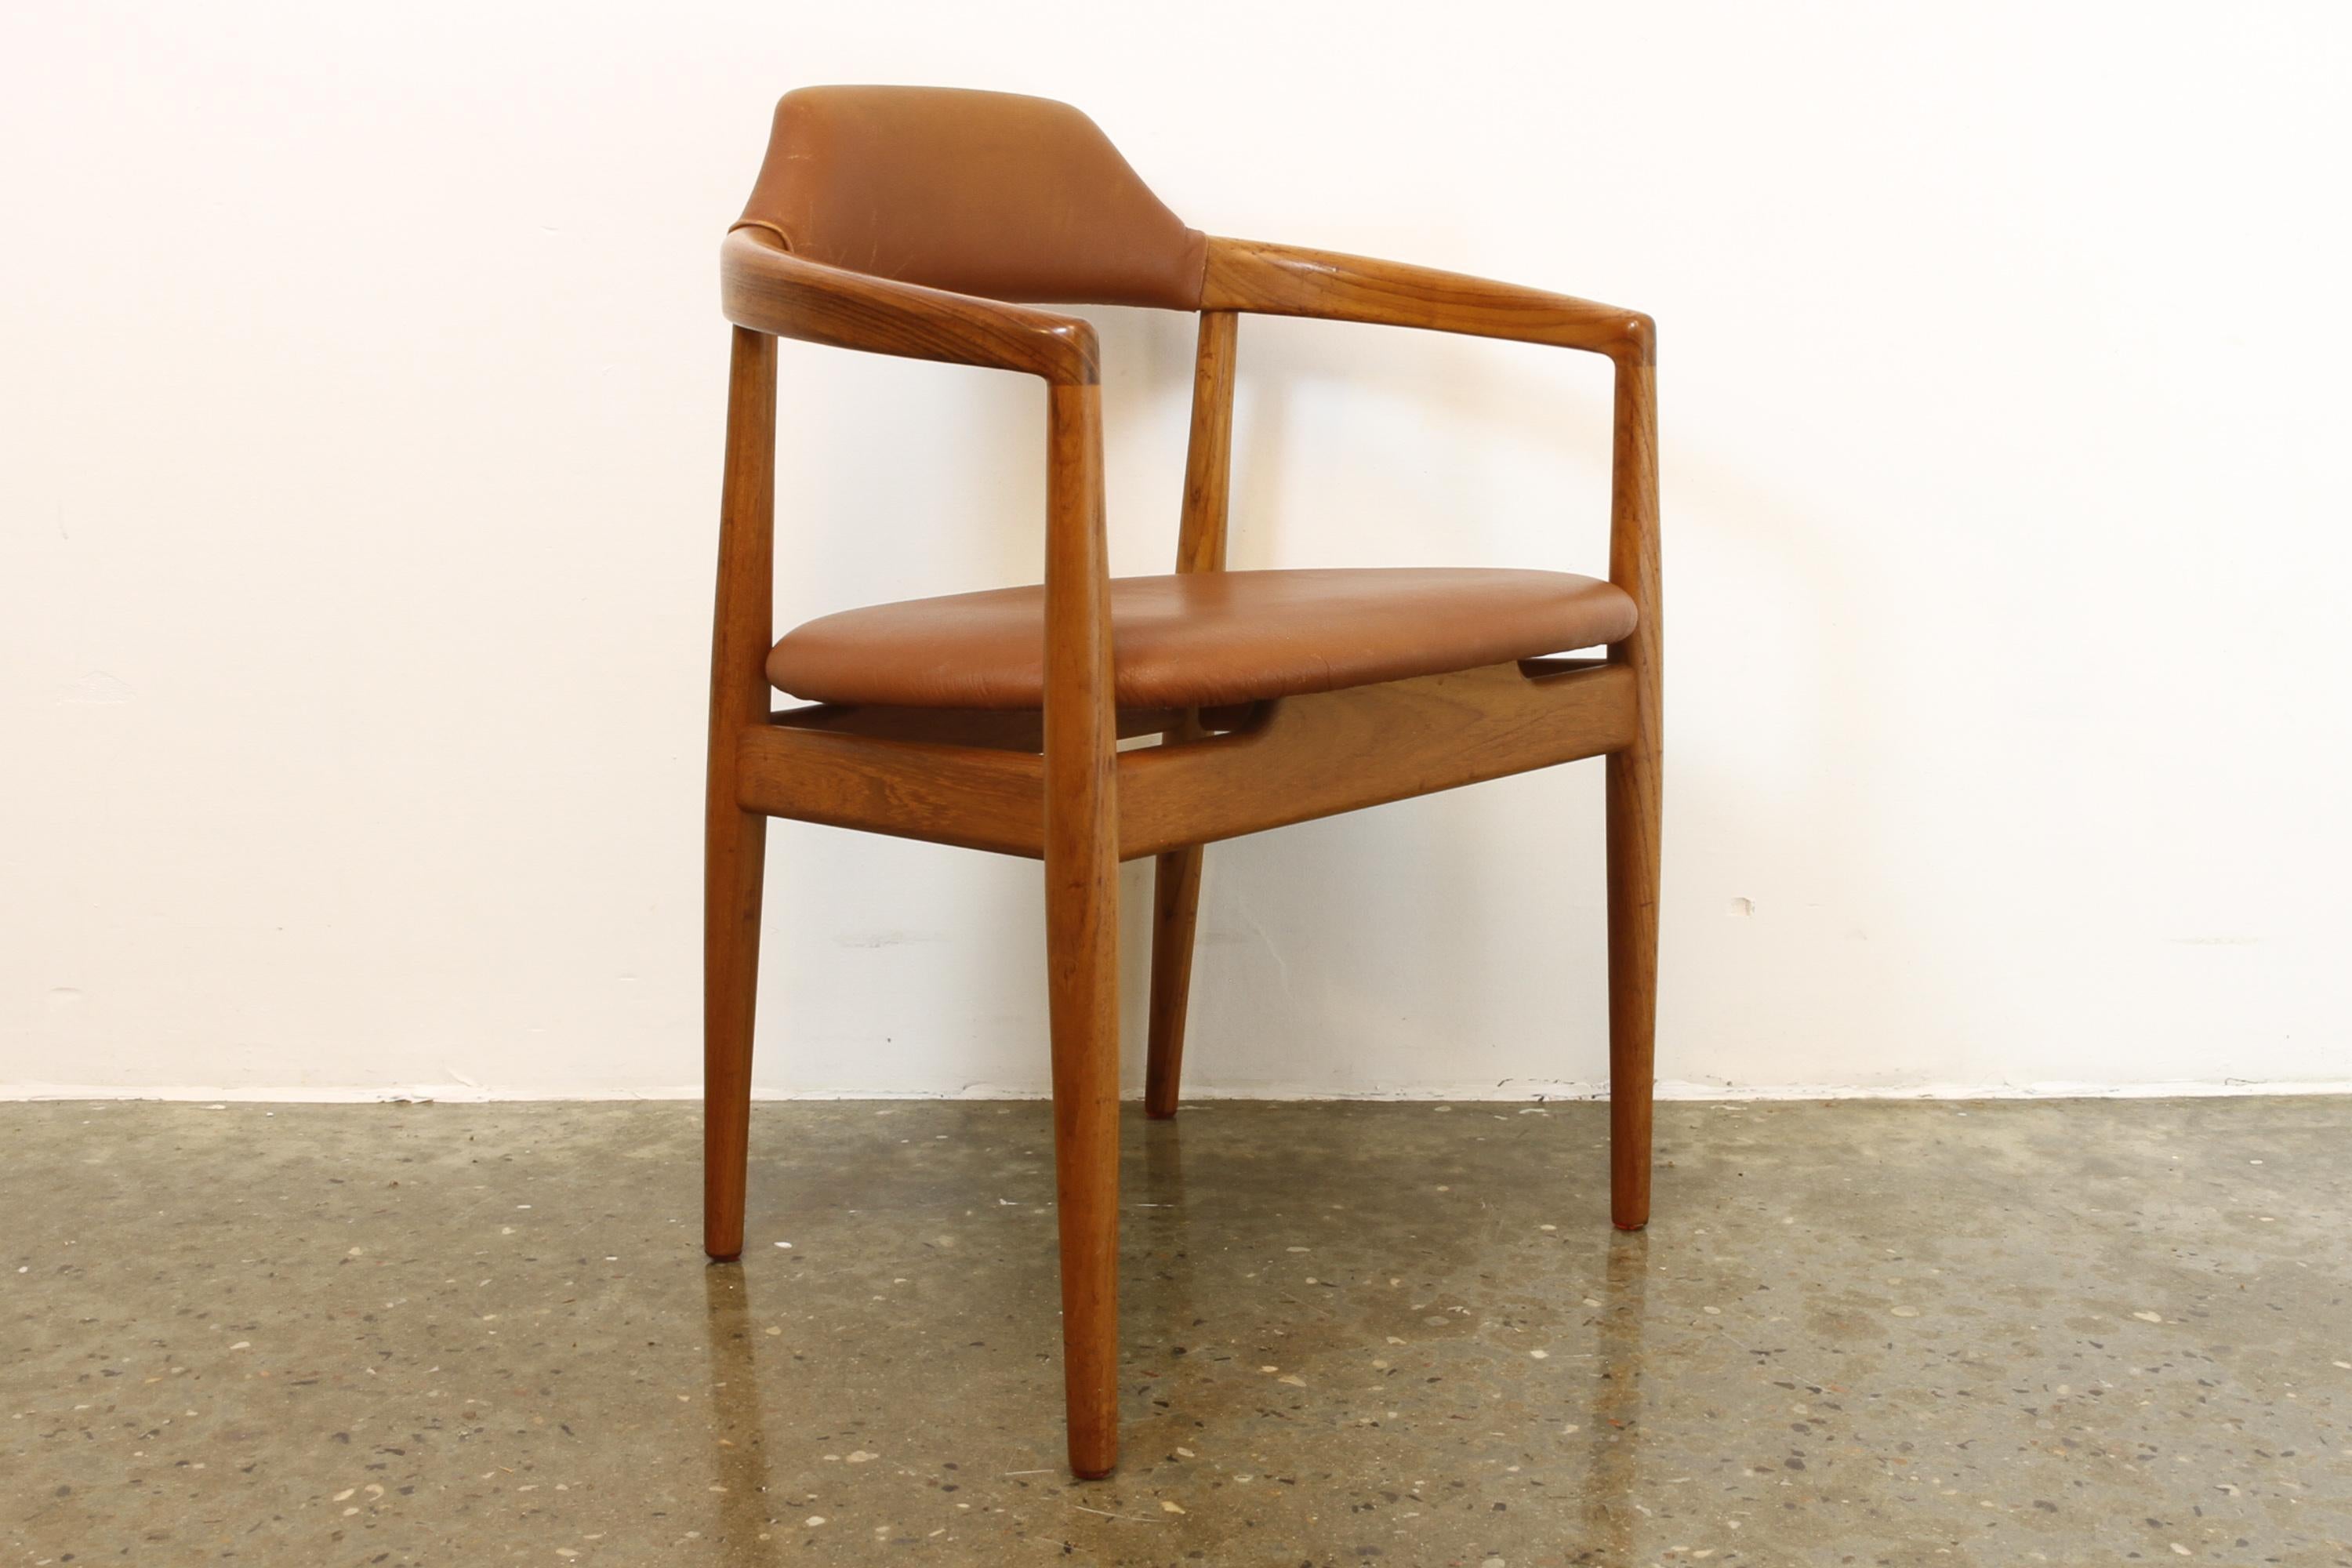 Vintage Danish teak and leather armchair, 1960s.
Elegant and stylish Scandinavian Mid-Century Modern armchair in solid teak with cognac colored leather upholstery. Large curved backrest and armrests. Round tapered legs. Beautiful joinery and